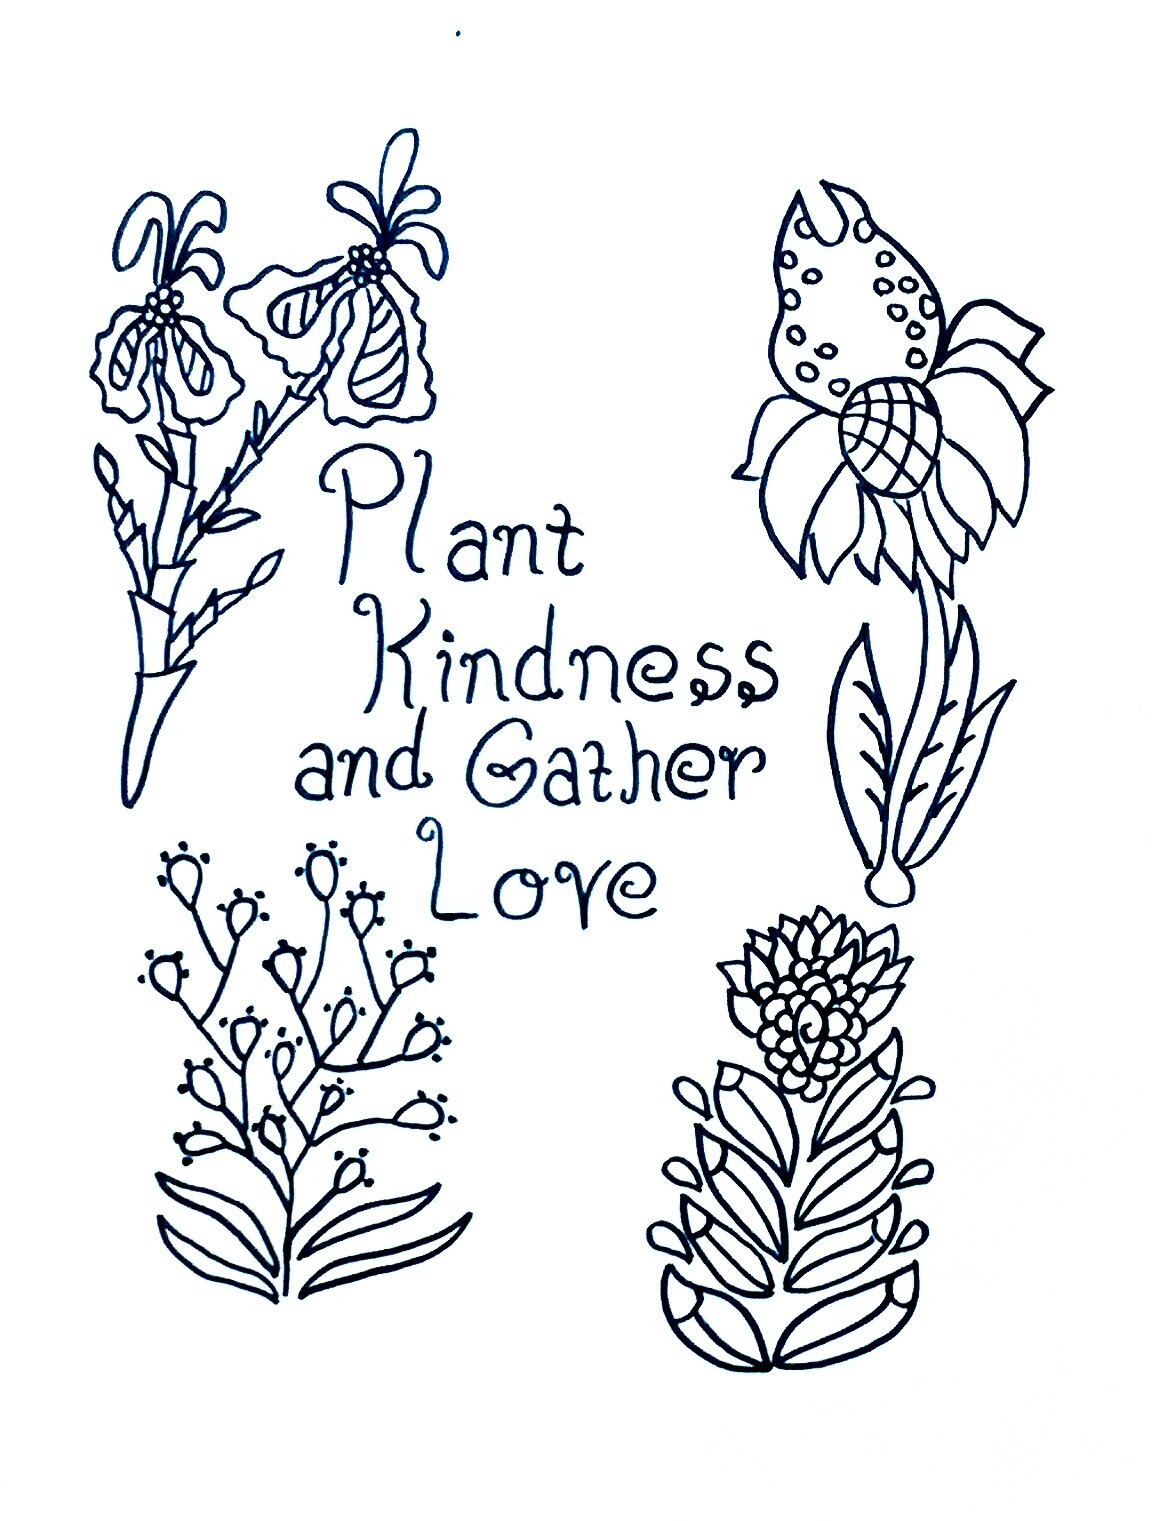 Kindness Coloring Pages Plant Kindness And Gather Love Free Coloring Page Individual